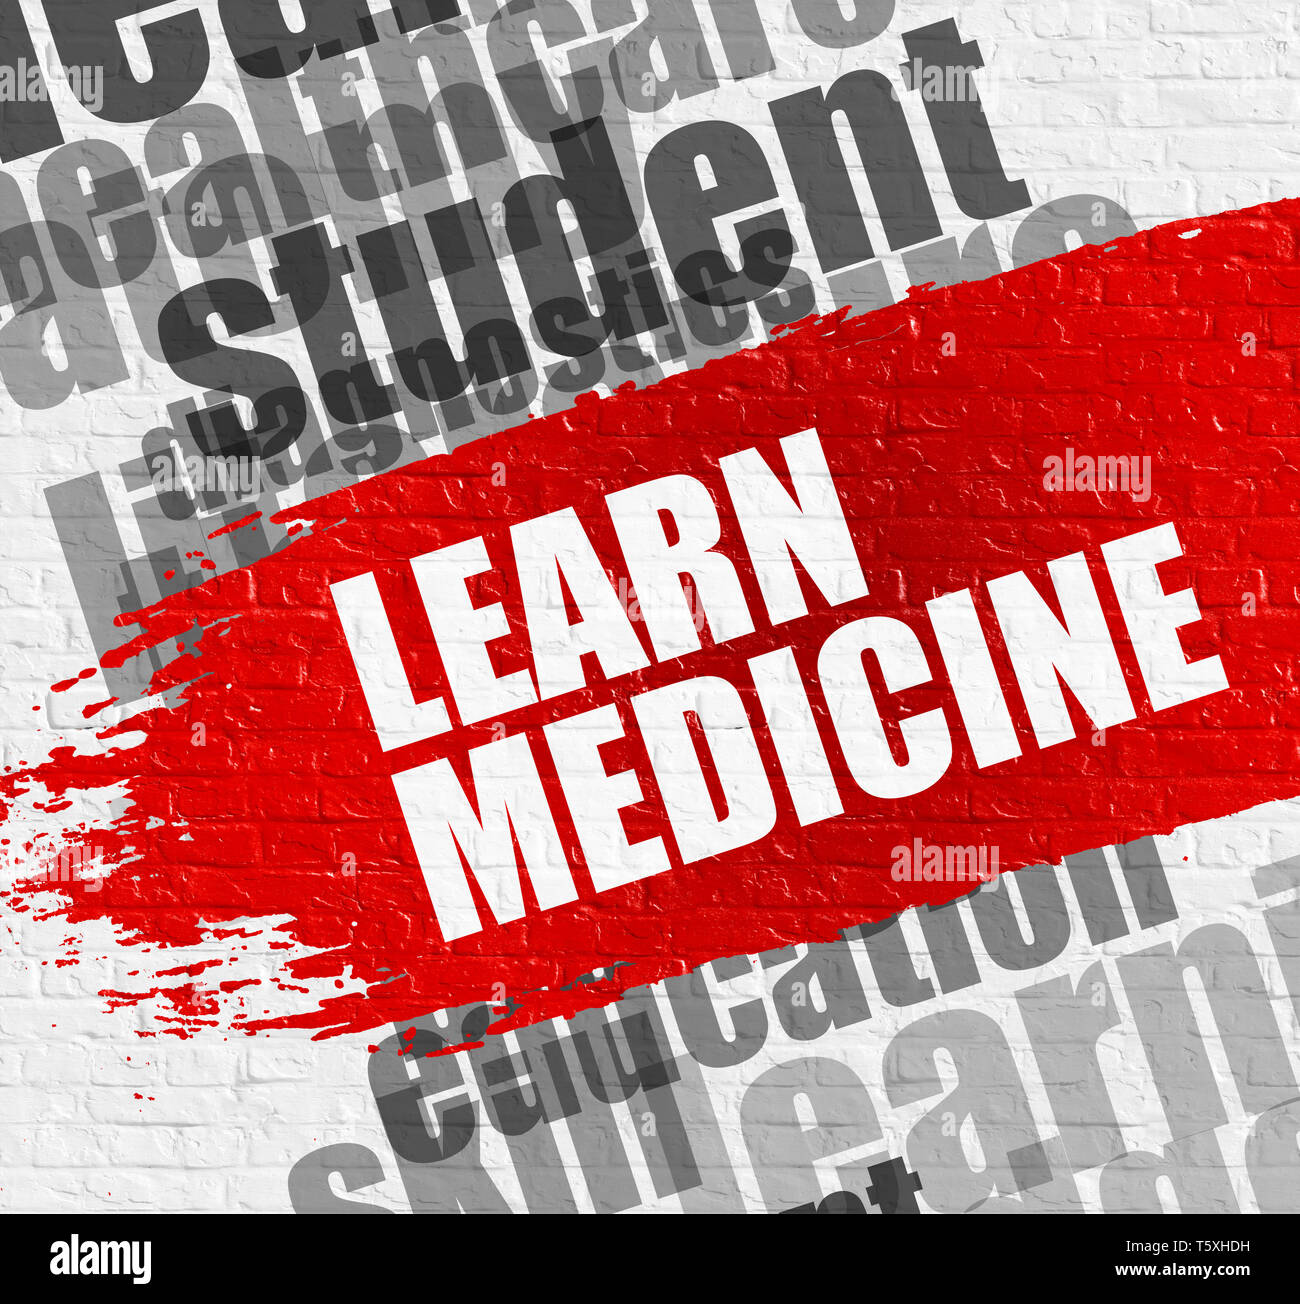 Education Service Concept: Learn Medicine. Red Text on the White Brick Wall. Learn Medicine - on the White Brick Wall with Word Cloud Around. Modern I Stock Photo